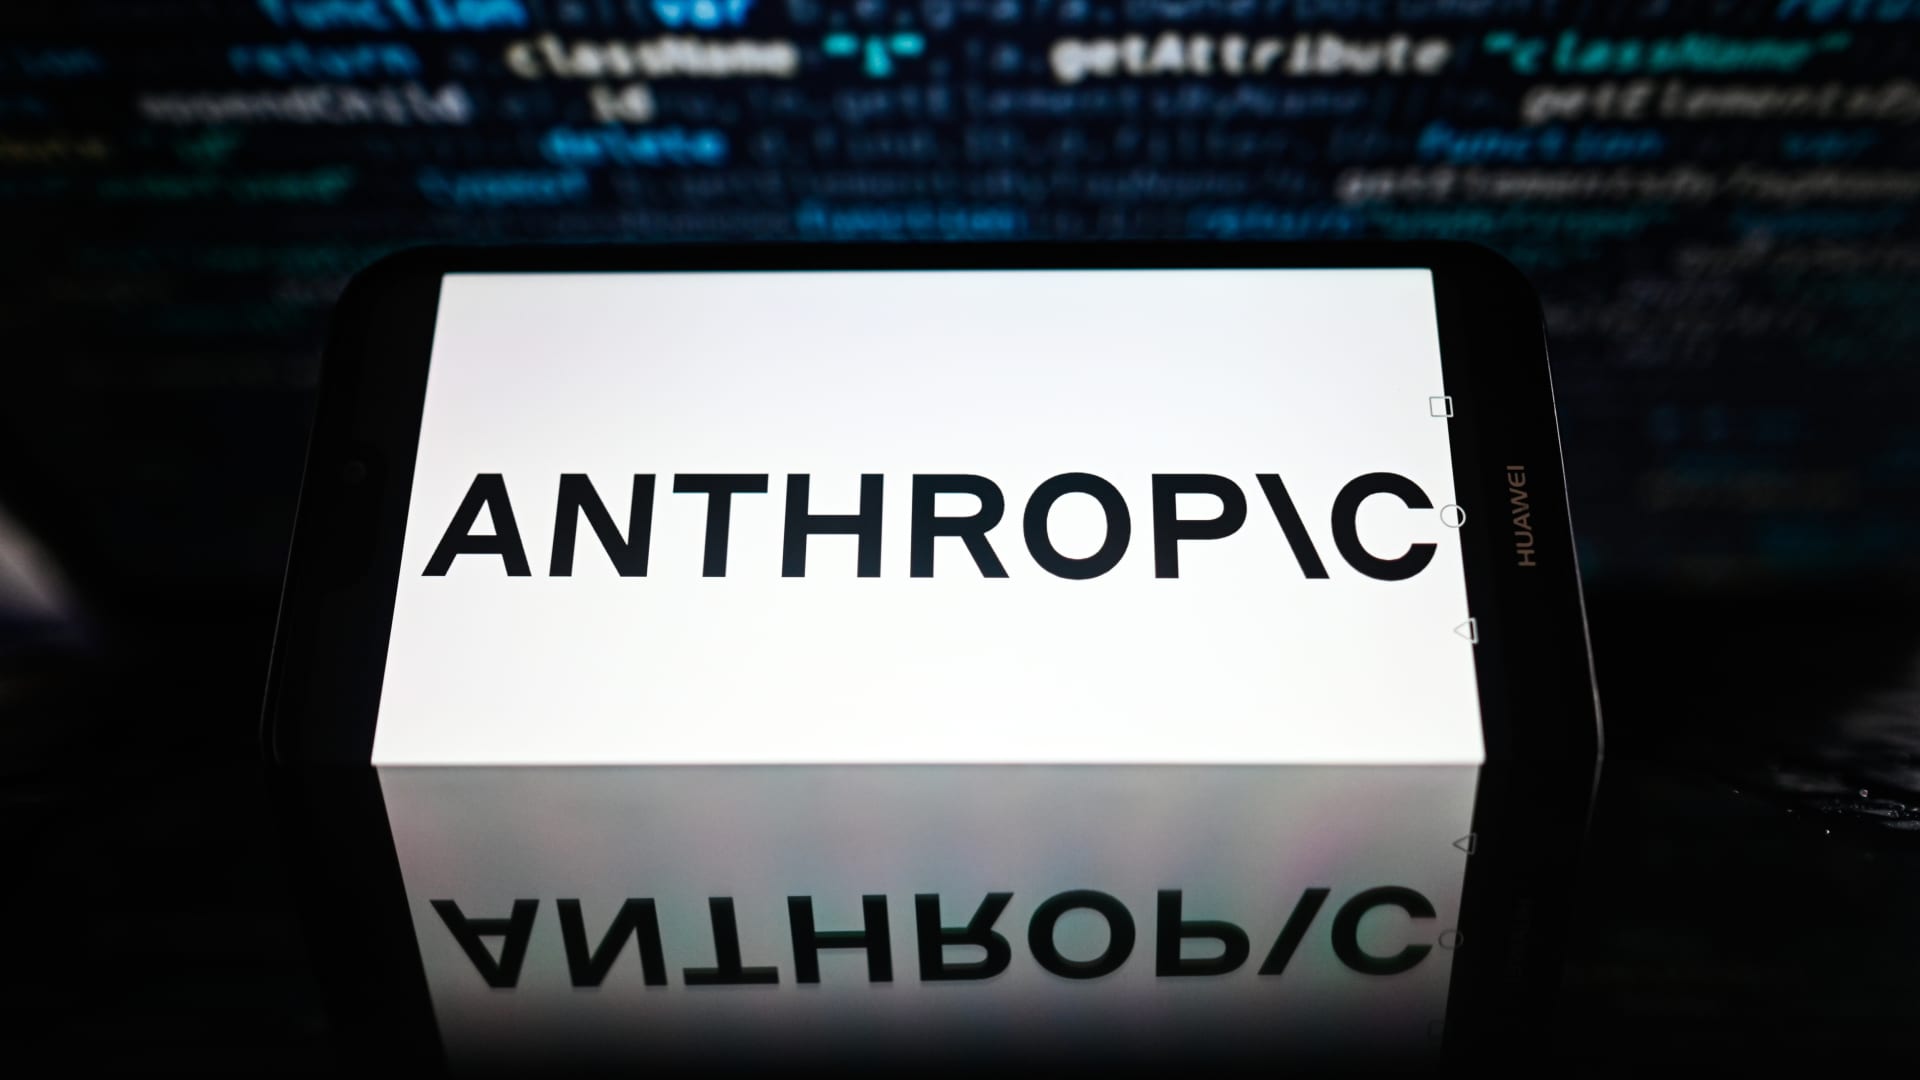 Anthropic, the OpenAI rival, is in talks to raise $750 million in funding at an $18.4 billion valuation